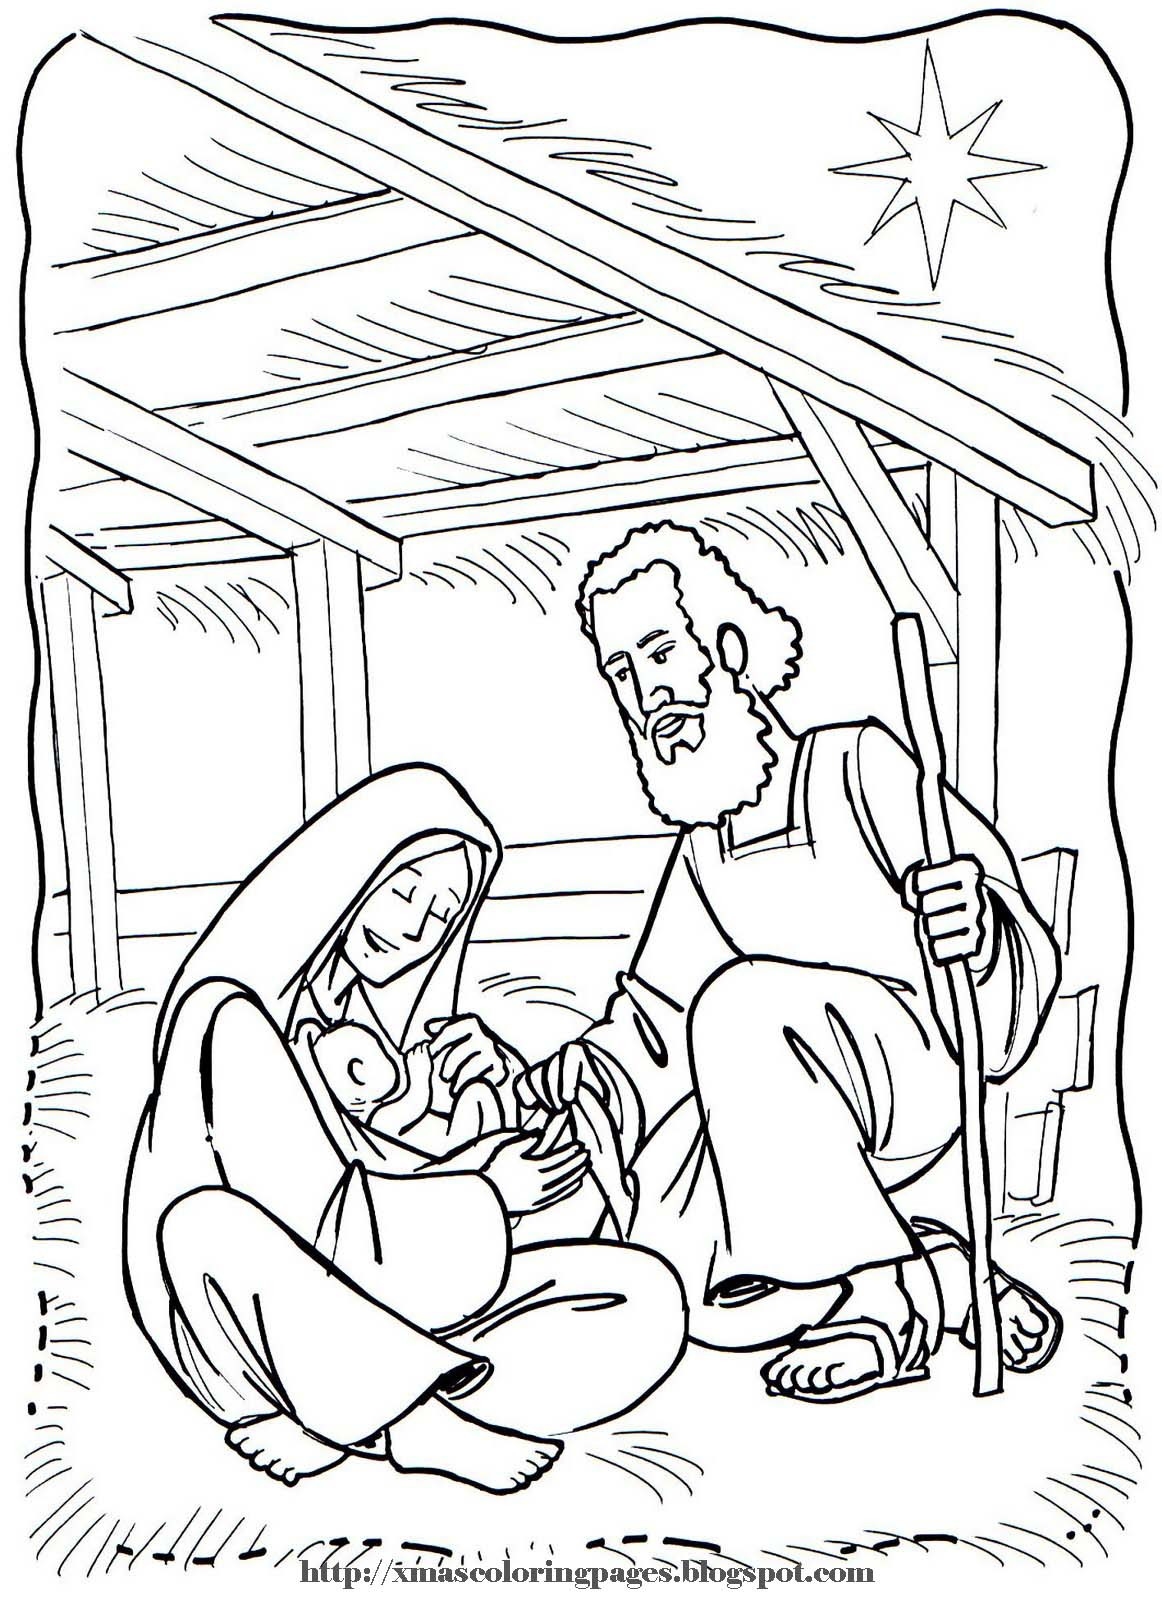 Baby Jesus In A Manger Coloring Pages
 Search Results for “Christmas Nativity Coloring Pages